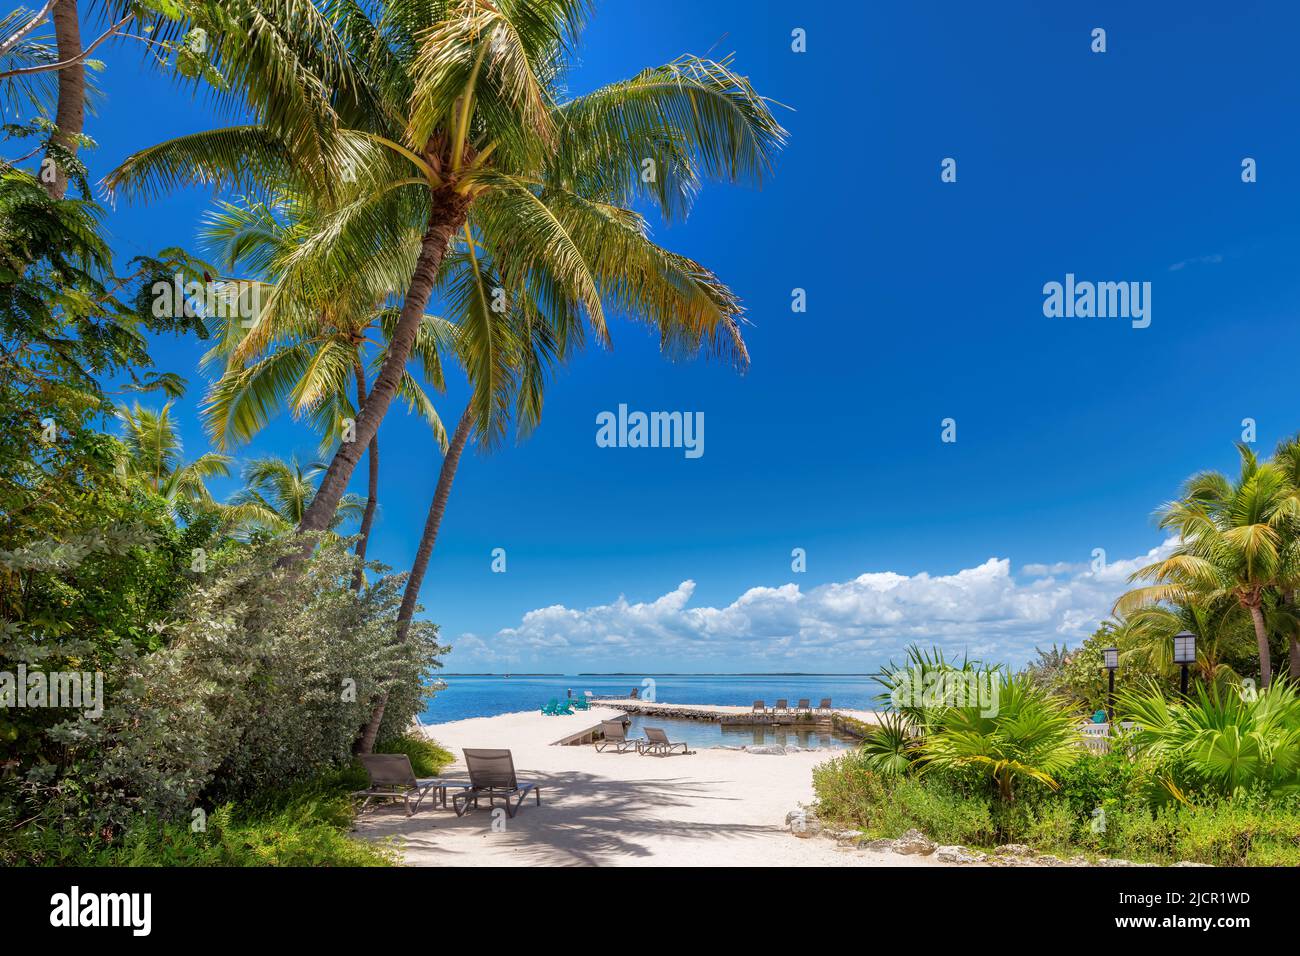 Palm trees and pier in beautiful tropical beach in Caribbean island Stock Photo